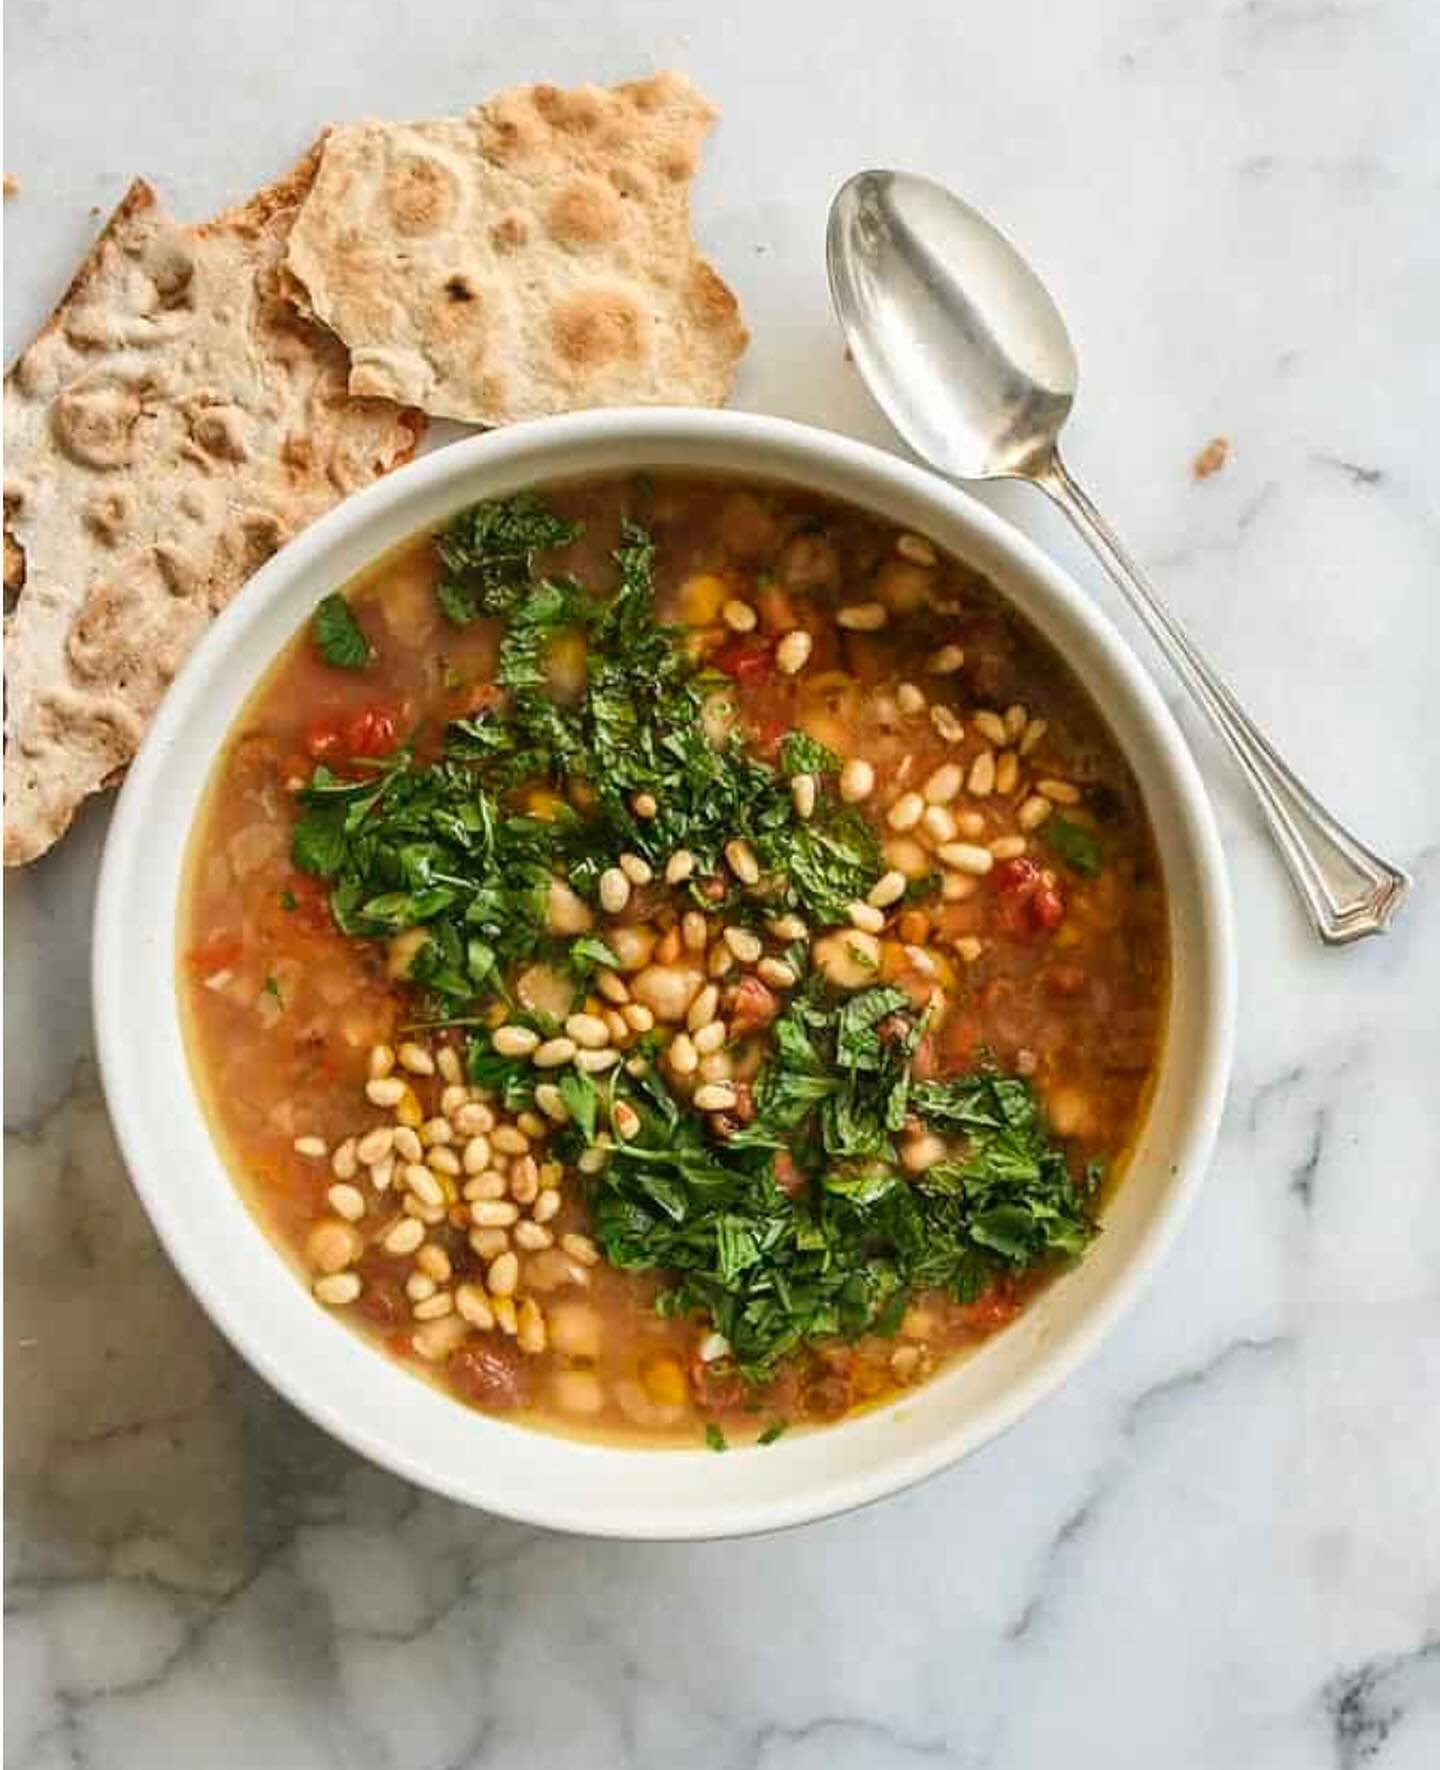 SIMPLY BEAUTIFUL RECIPES

BEAUTIFUL FOOD BY DESIGN | MEATLESS MONDAY | Chickpea &amp; Fava Stew | This is one of my favorites my From the Garden Cookbook, a hot bowl of goodness, and so simple to make. If you are not familiar with this warming bowl o